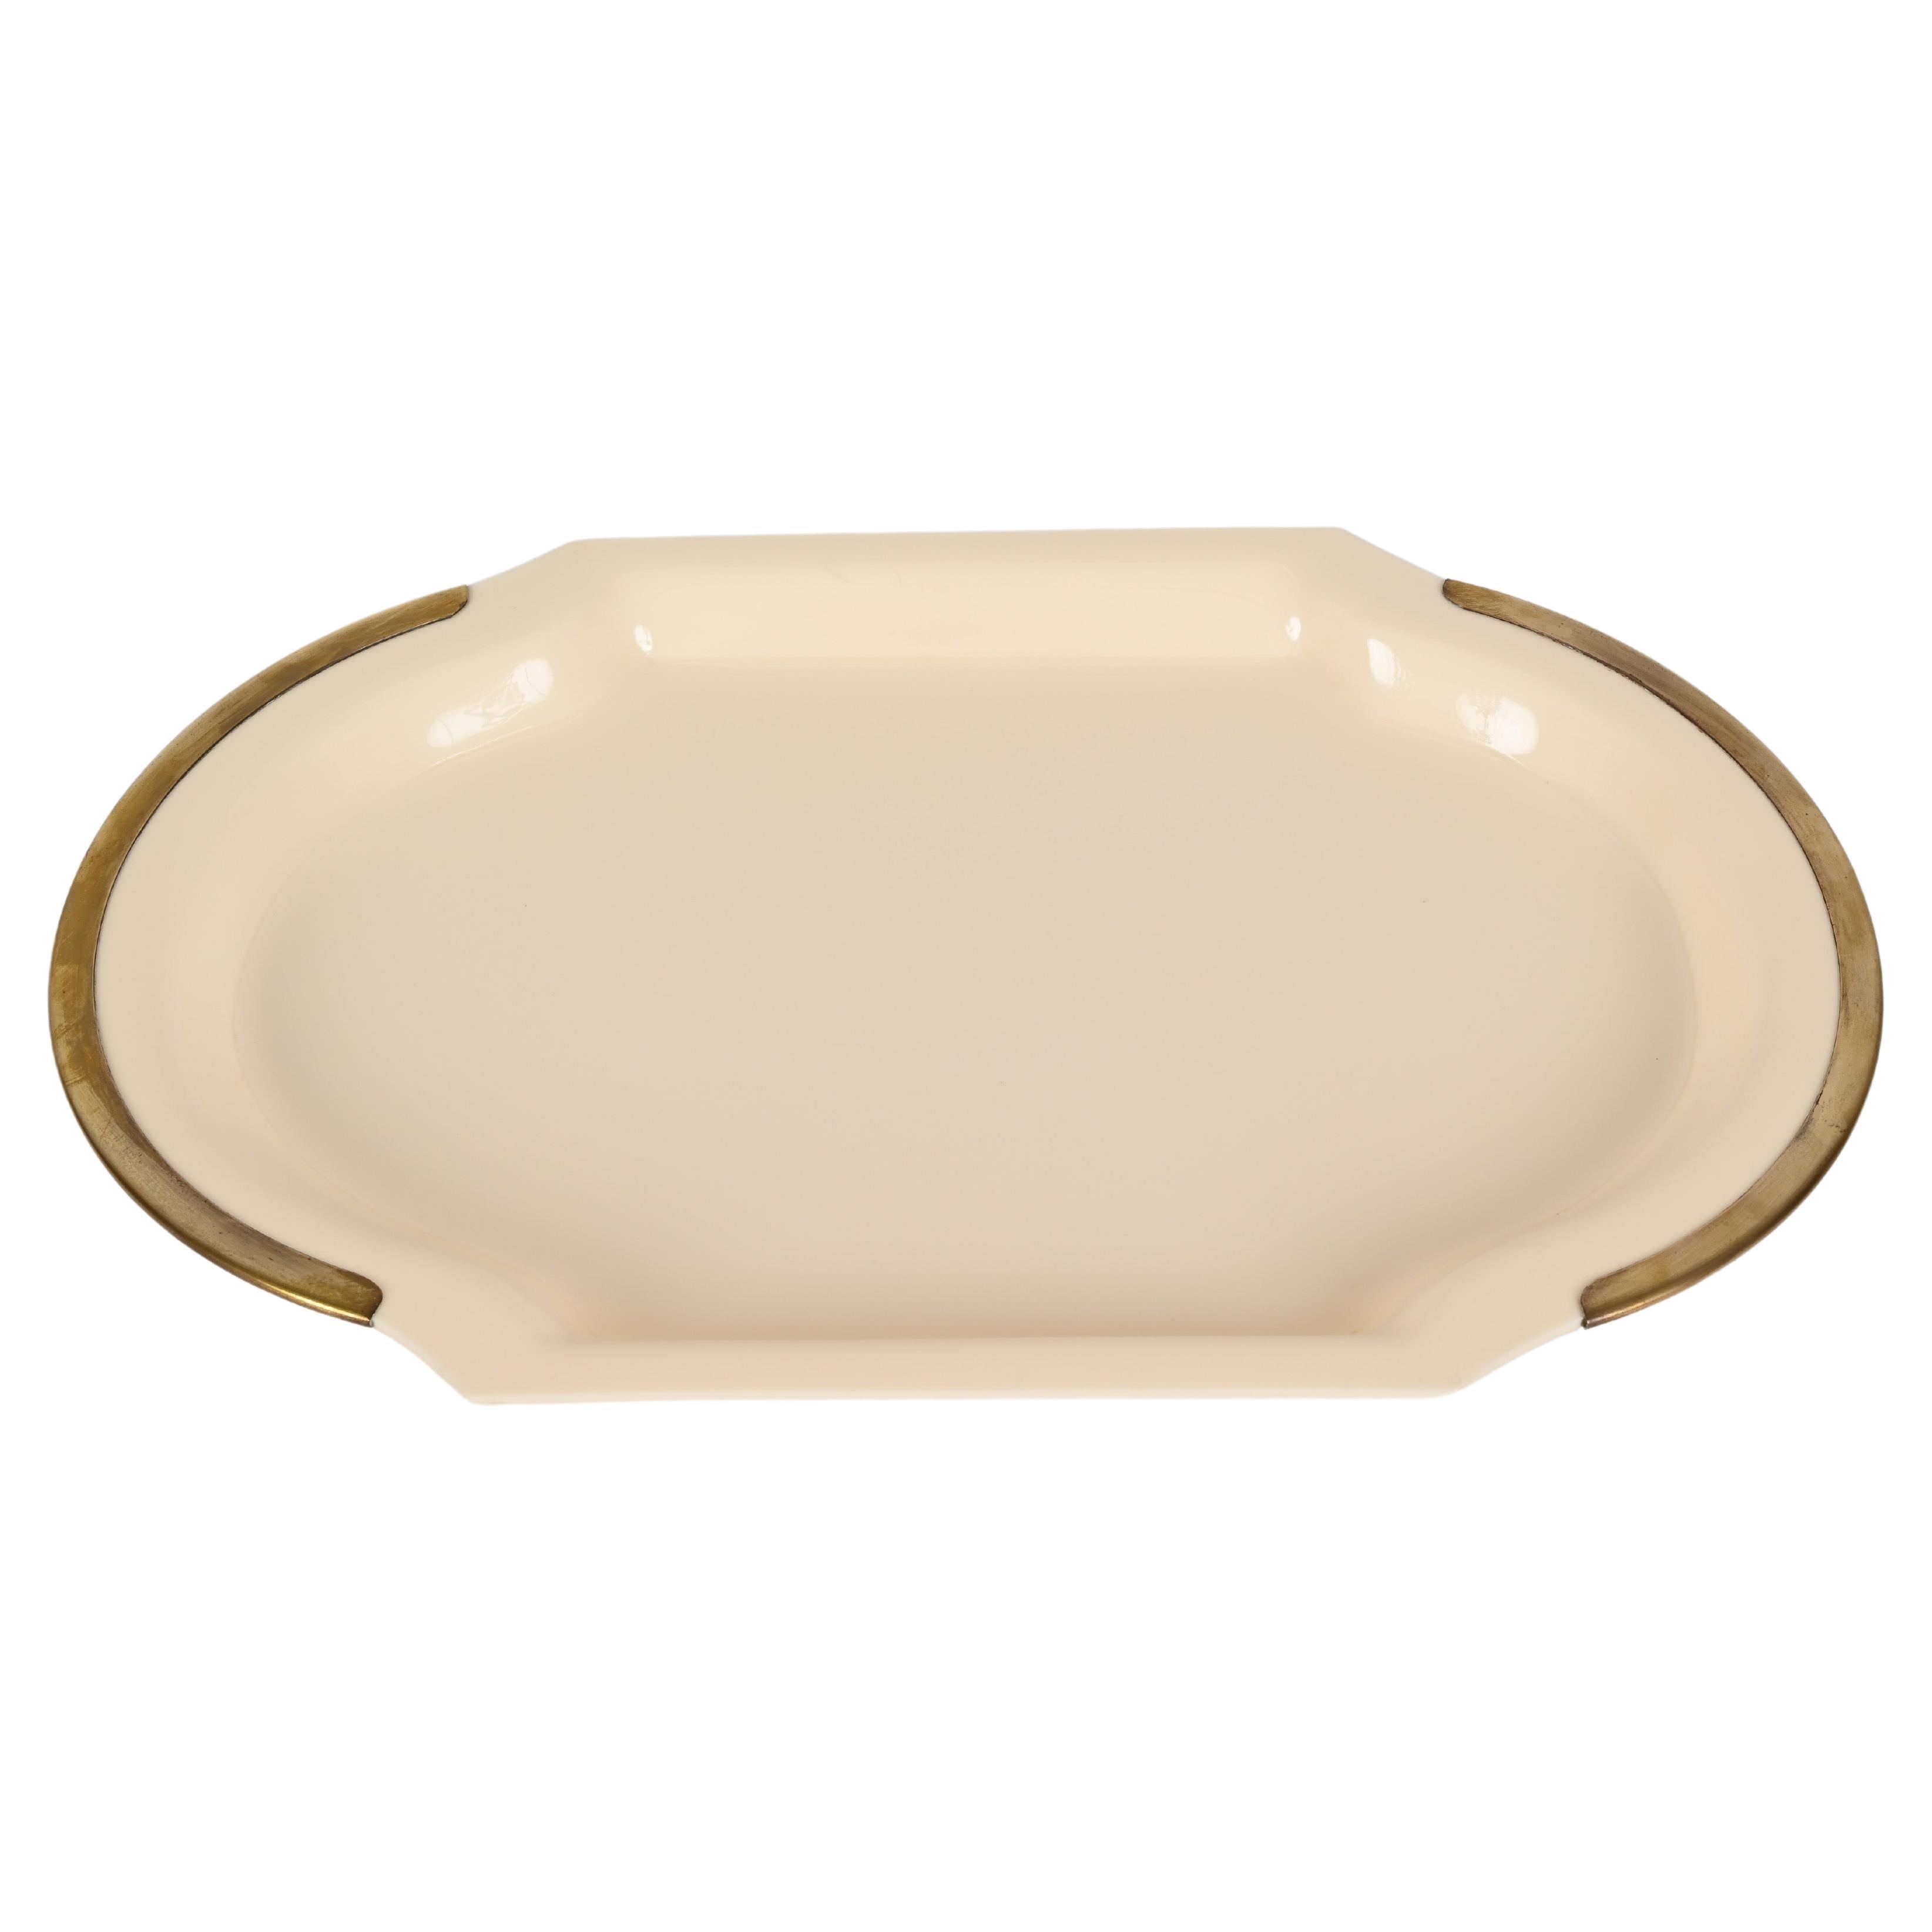 Mid-Century Oval Serving Tray in Brass and Cream-Colored Plexiglass, Italy 1980s For Sale